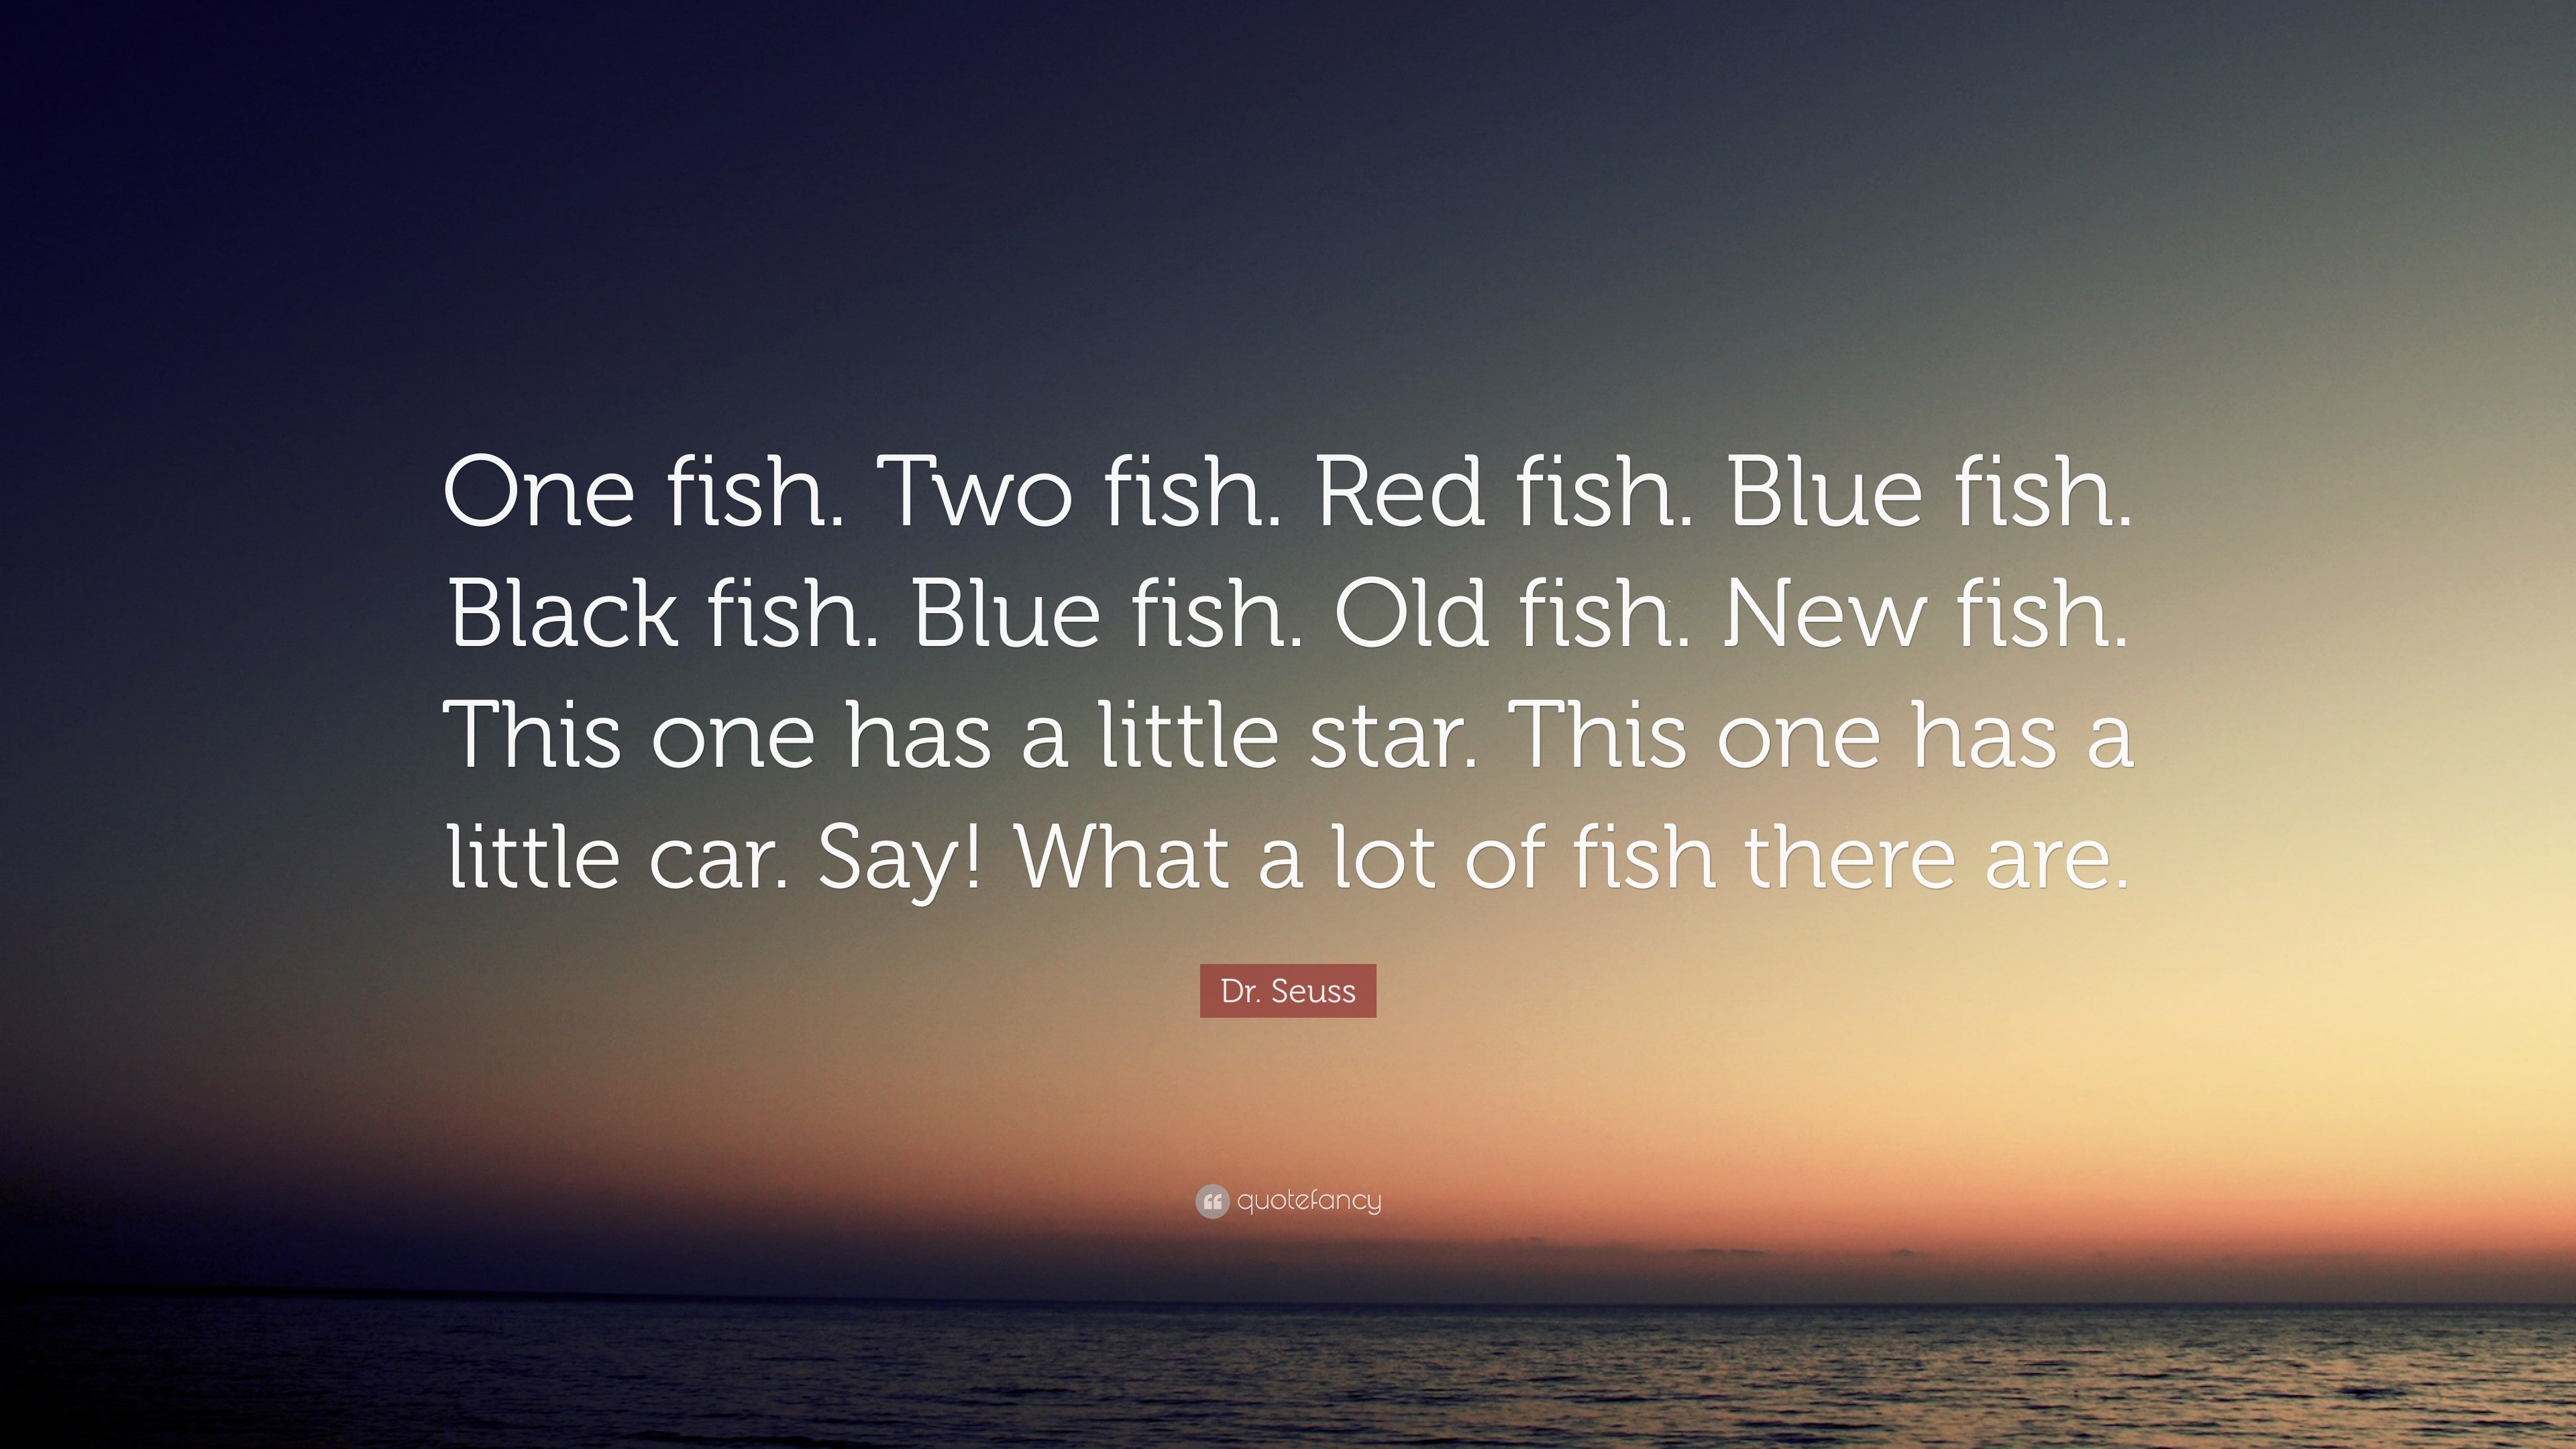 Dr. Seuss Quote: “One fish. Two fish. Red fish. Blue fish. Black